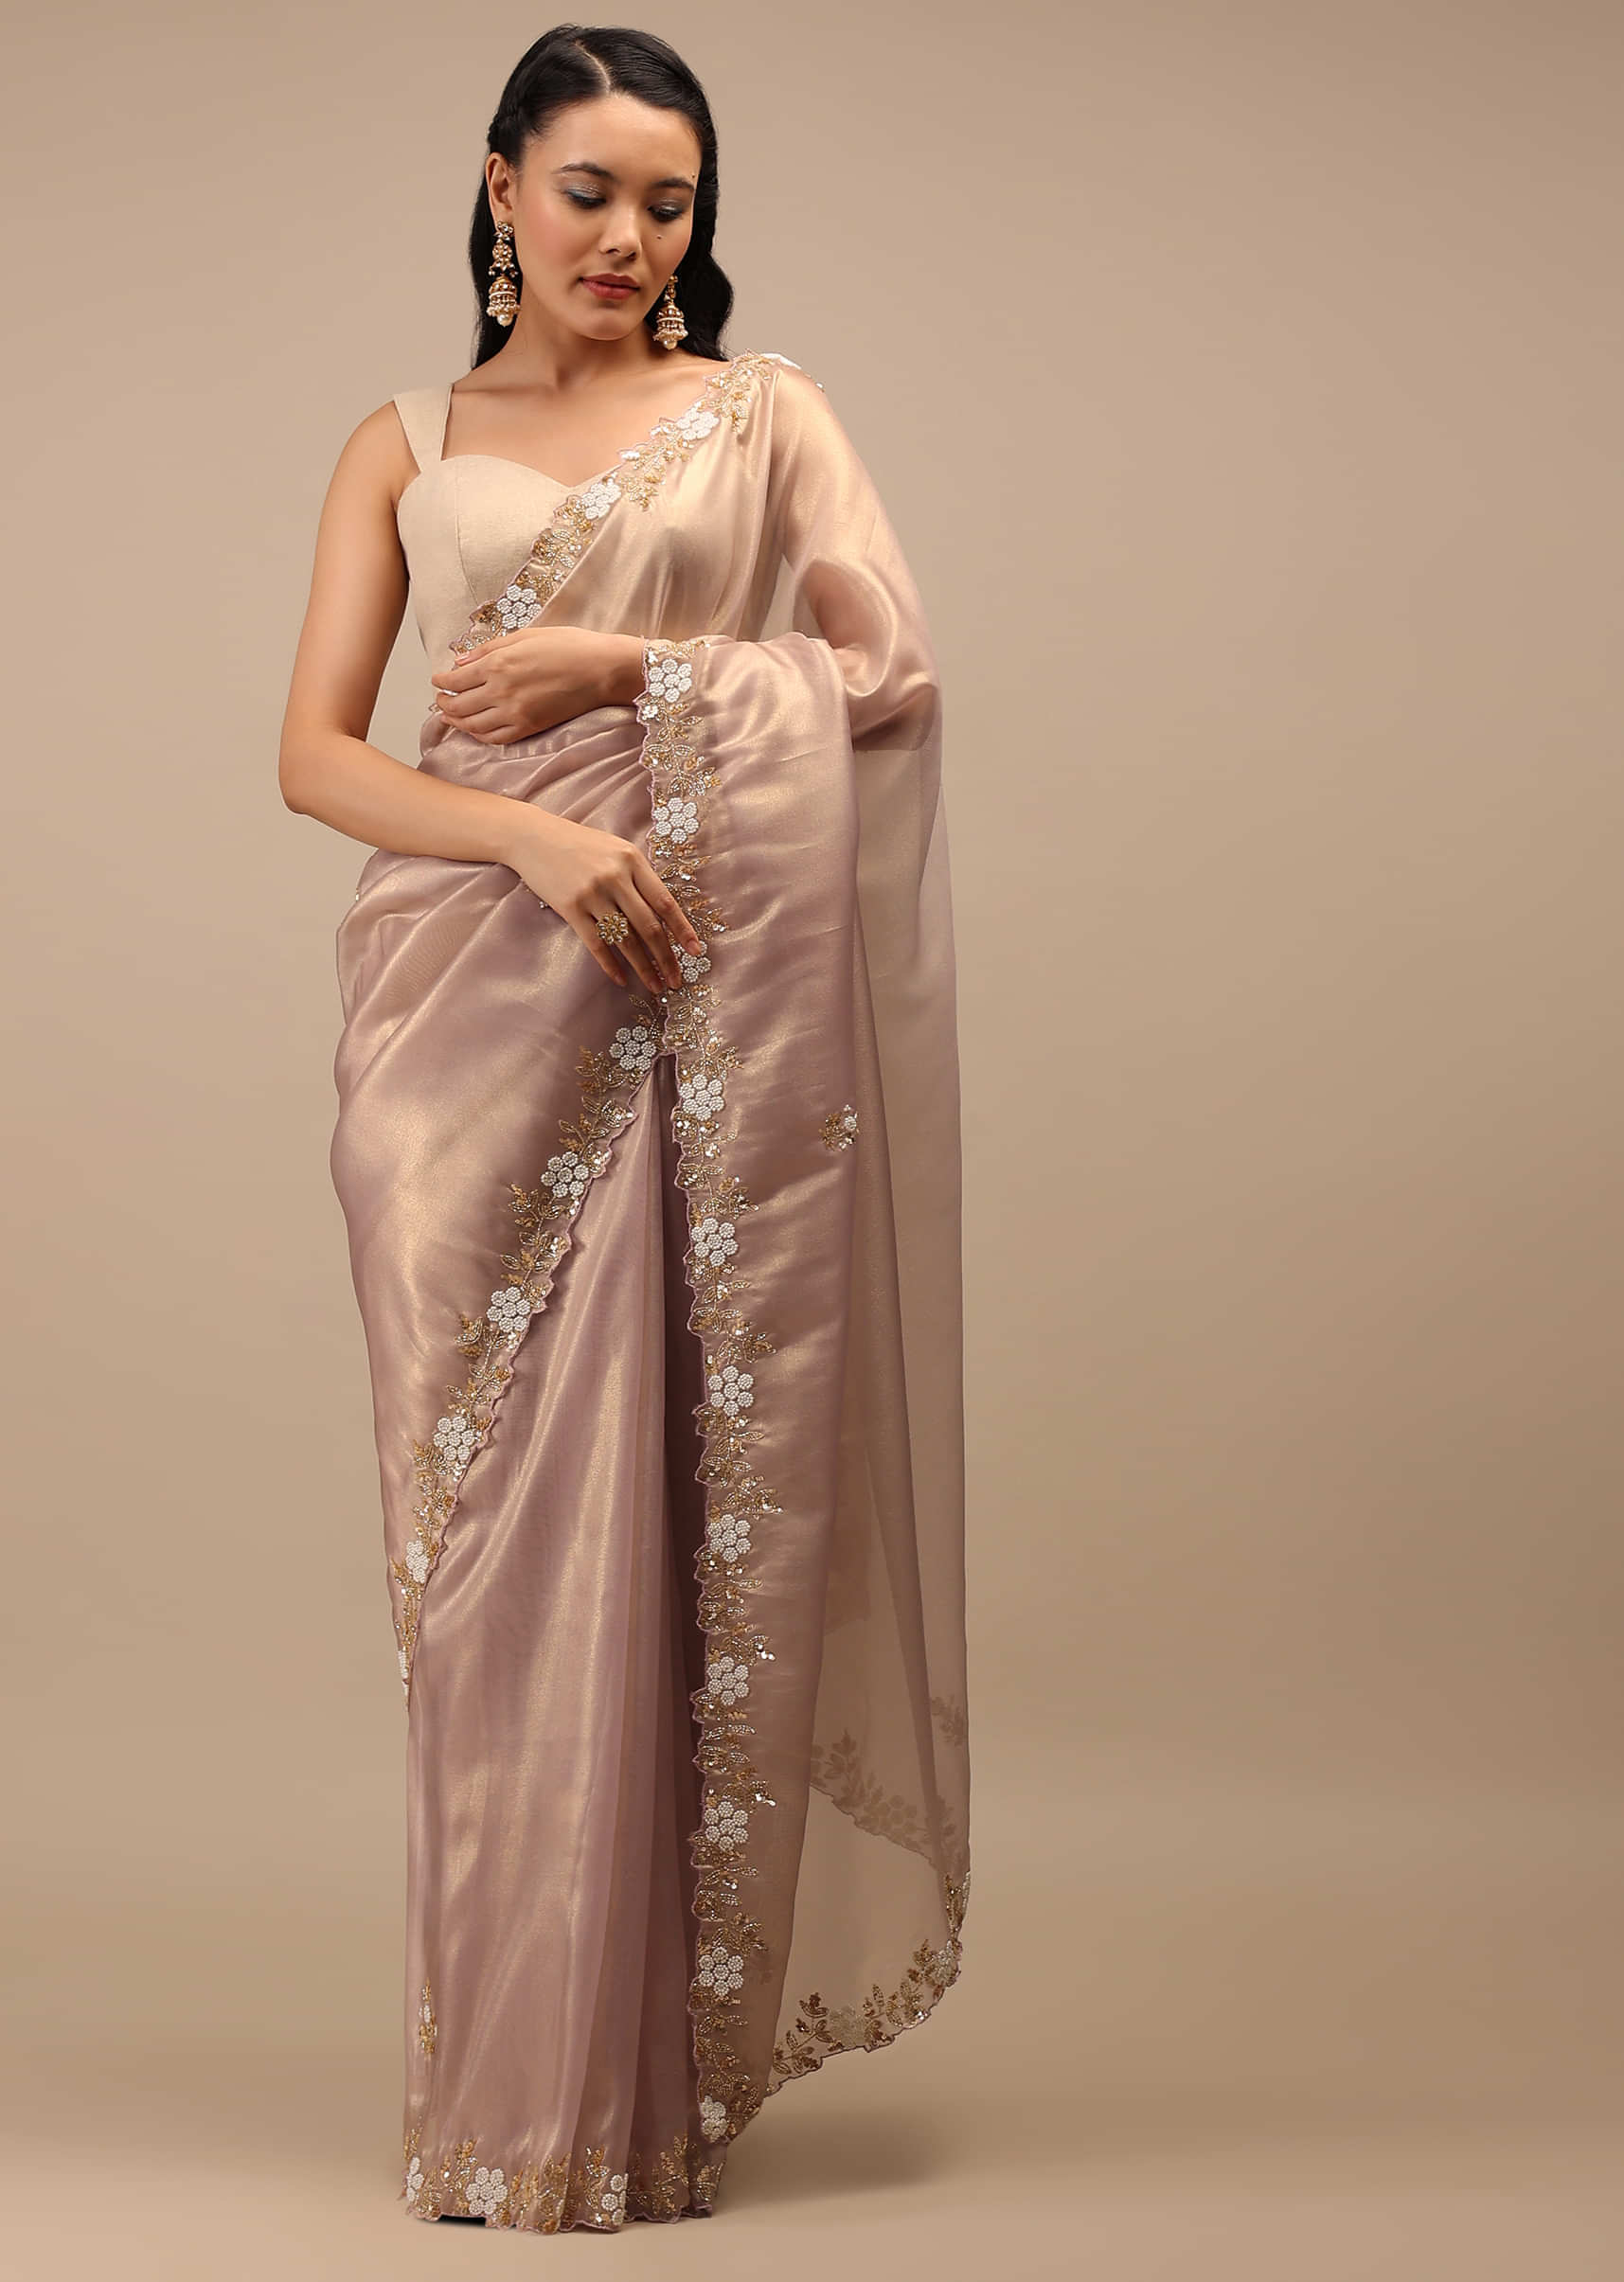 Mauve Tissue Saree In White Moti And Cut Dana Embroidery Buttis, Border Has Cutwork Embroidery Detailing